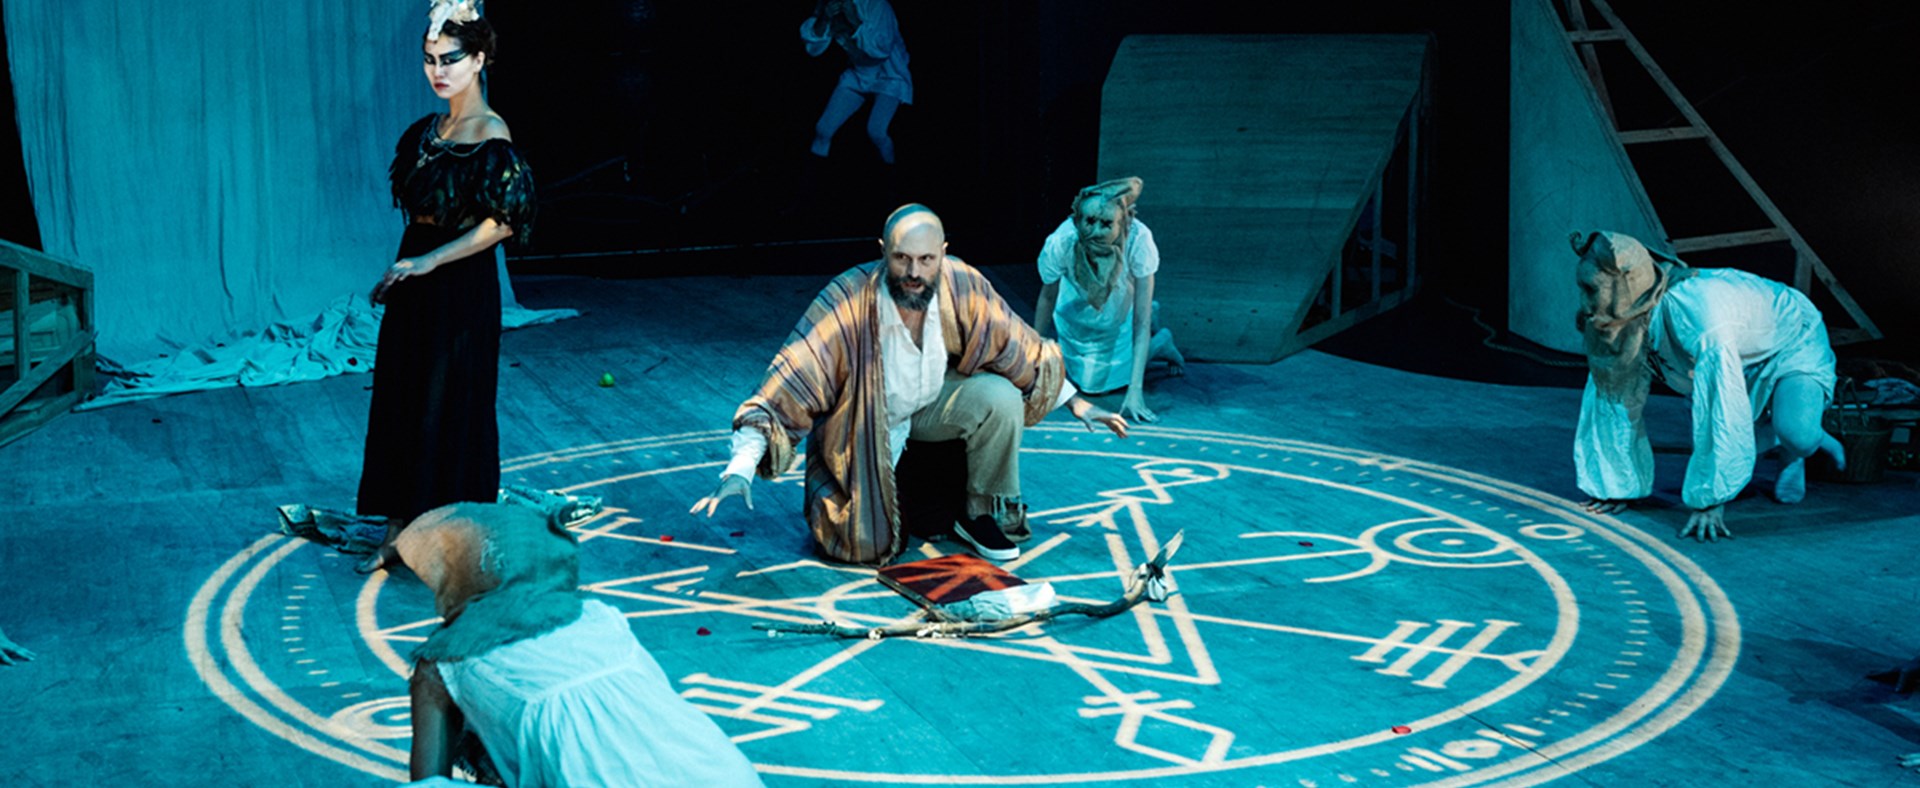 Image of the Tempest/Hag-seed Symposium by Sport For Jove Theatre Company. Shows five actors in the foreground crouching around a projected circle with symbols on the floor.